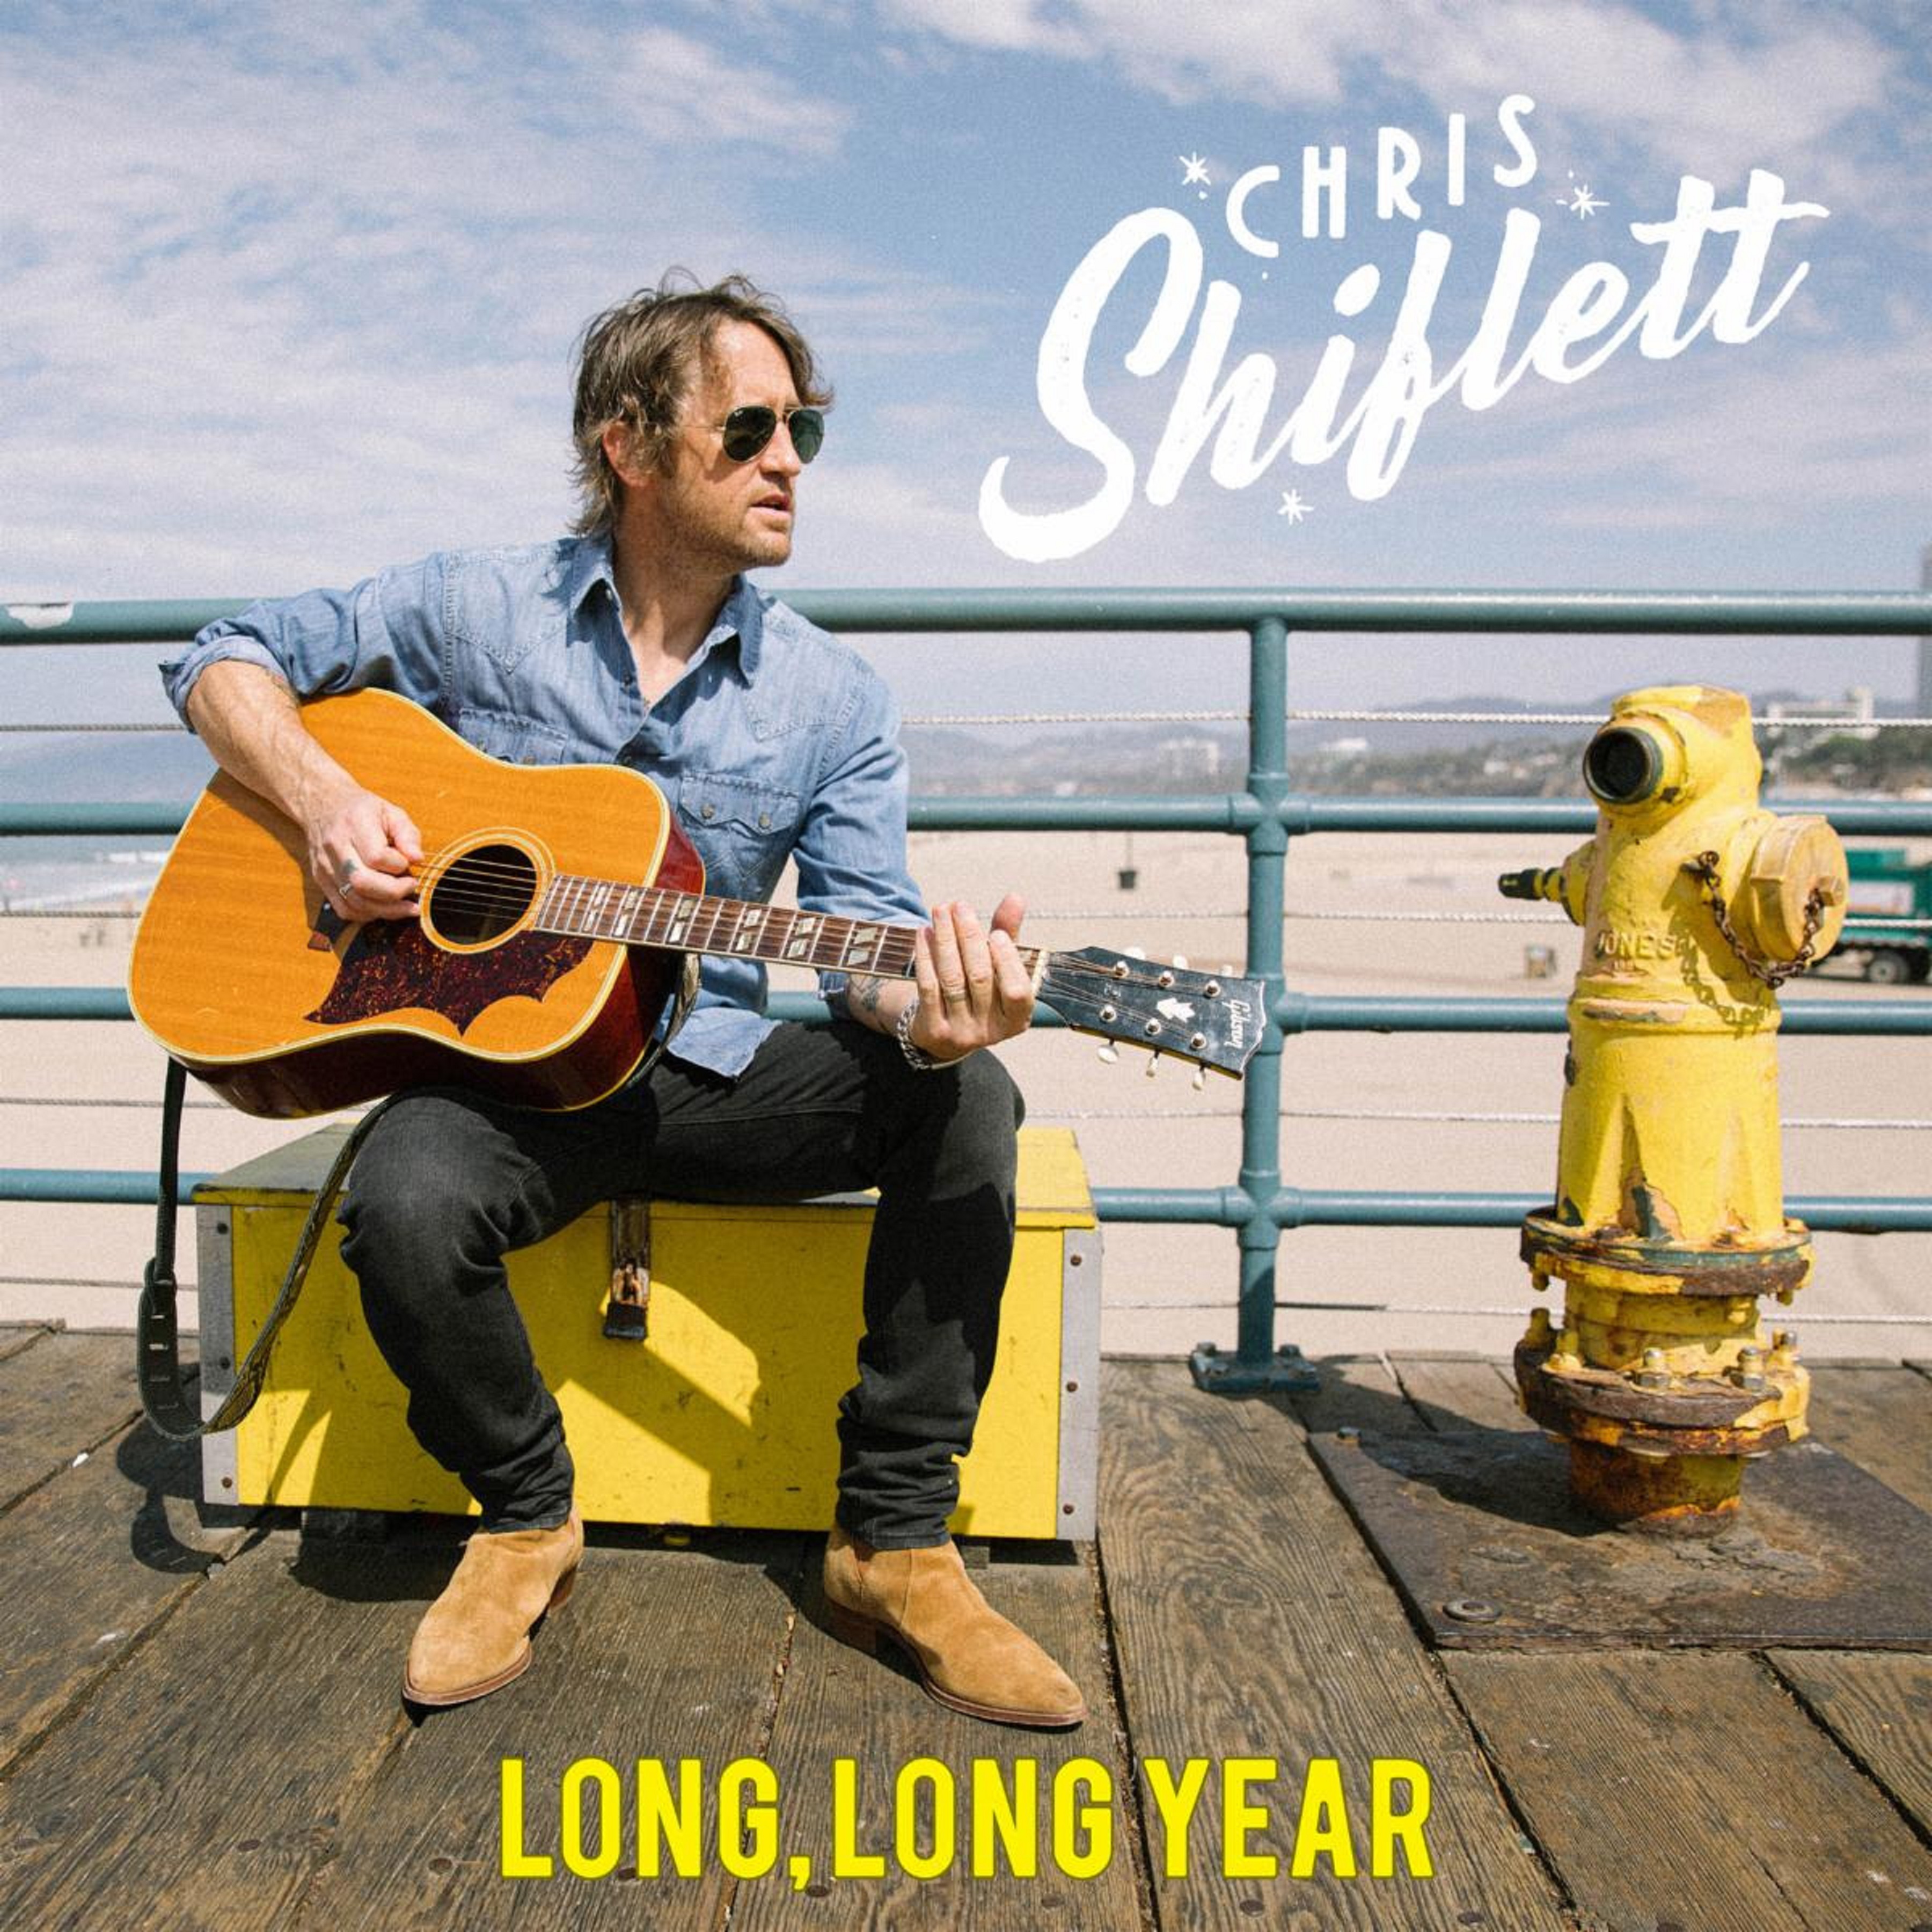 Chris Shiflett Ties Together His California Roots And Nashville Sound With New Single “Long, Long Year”